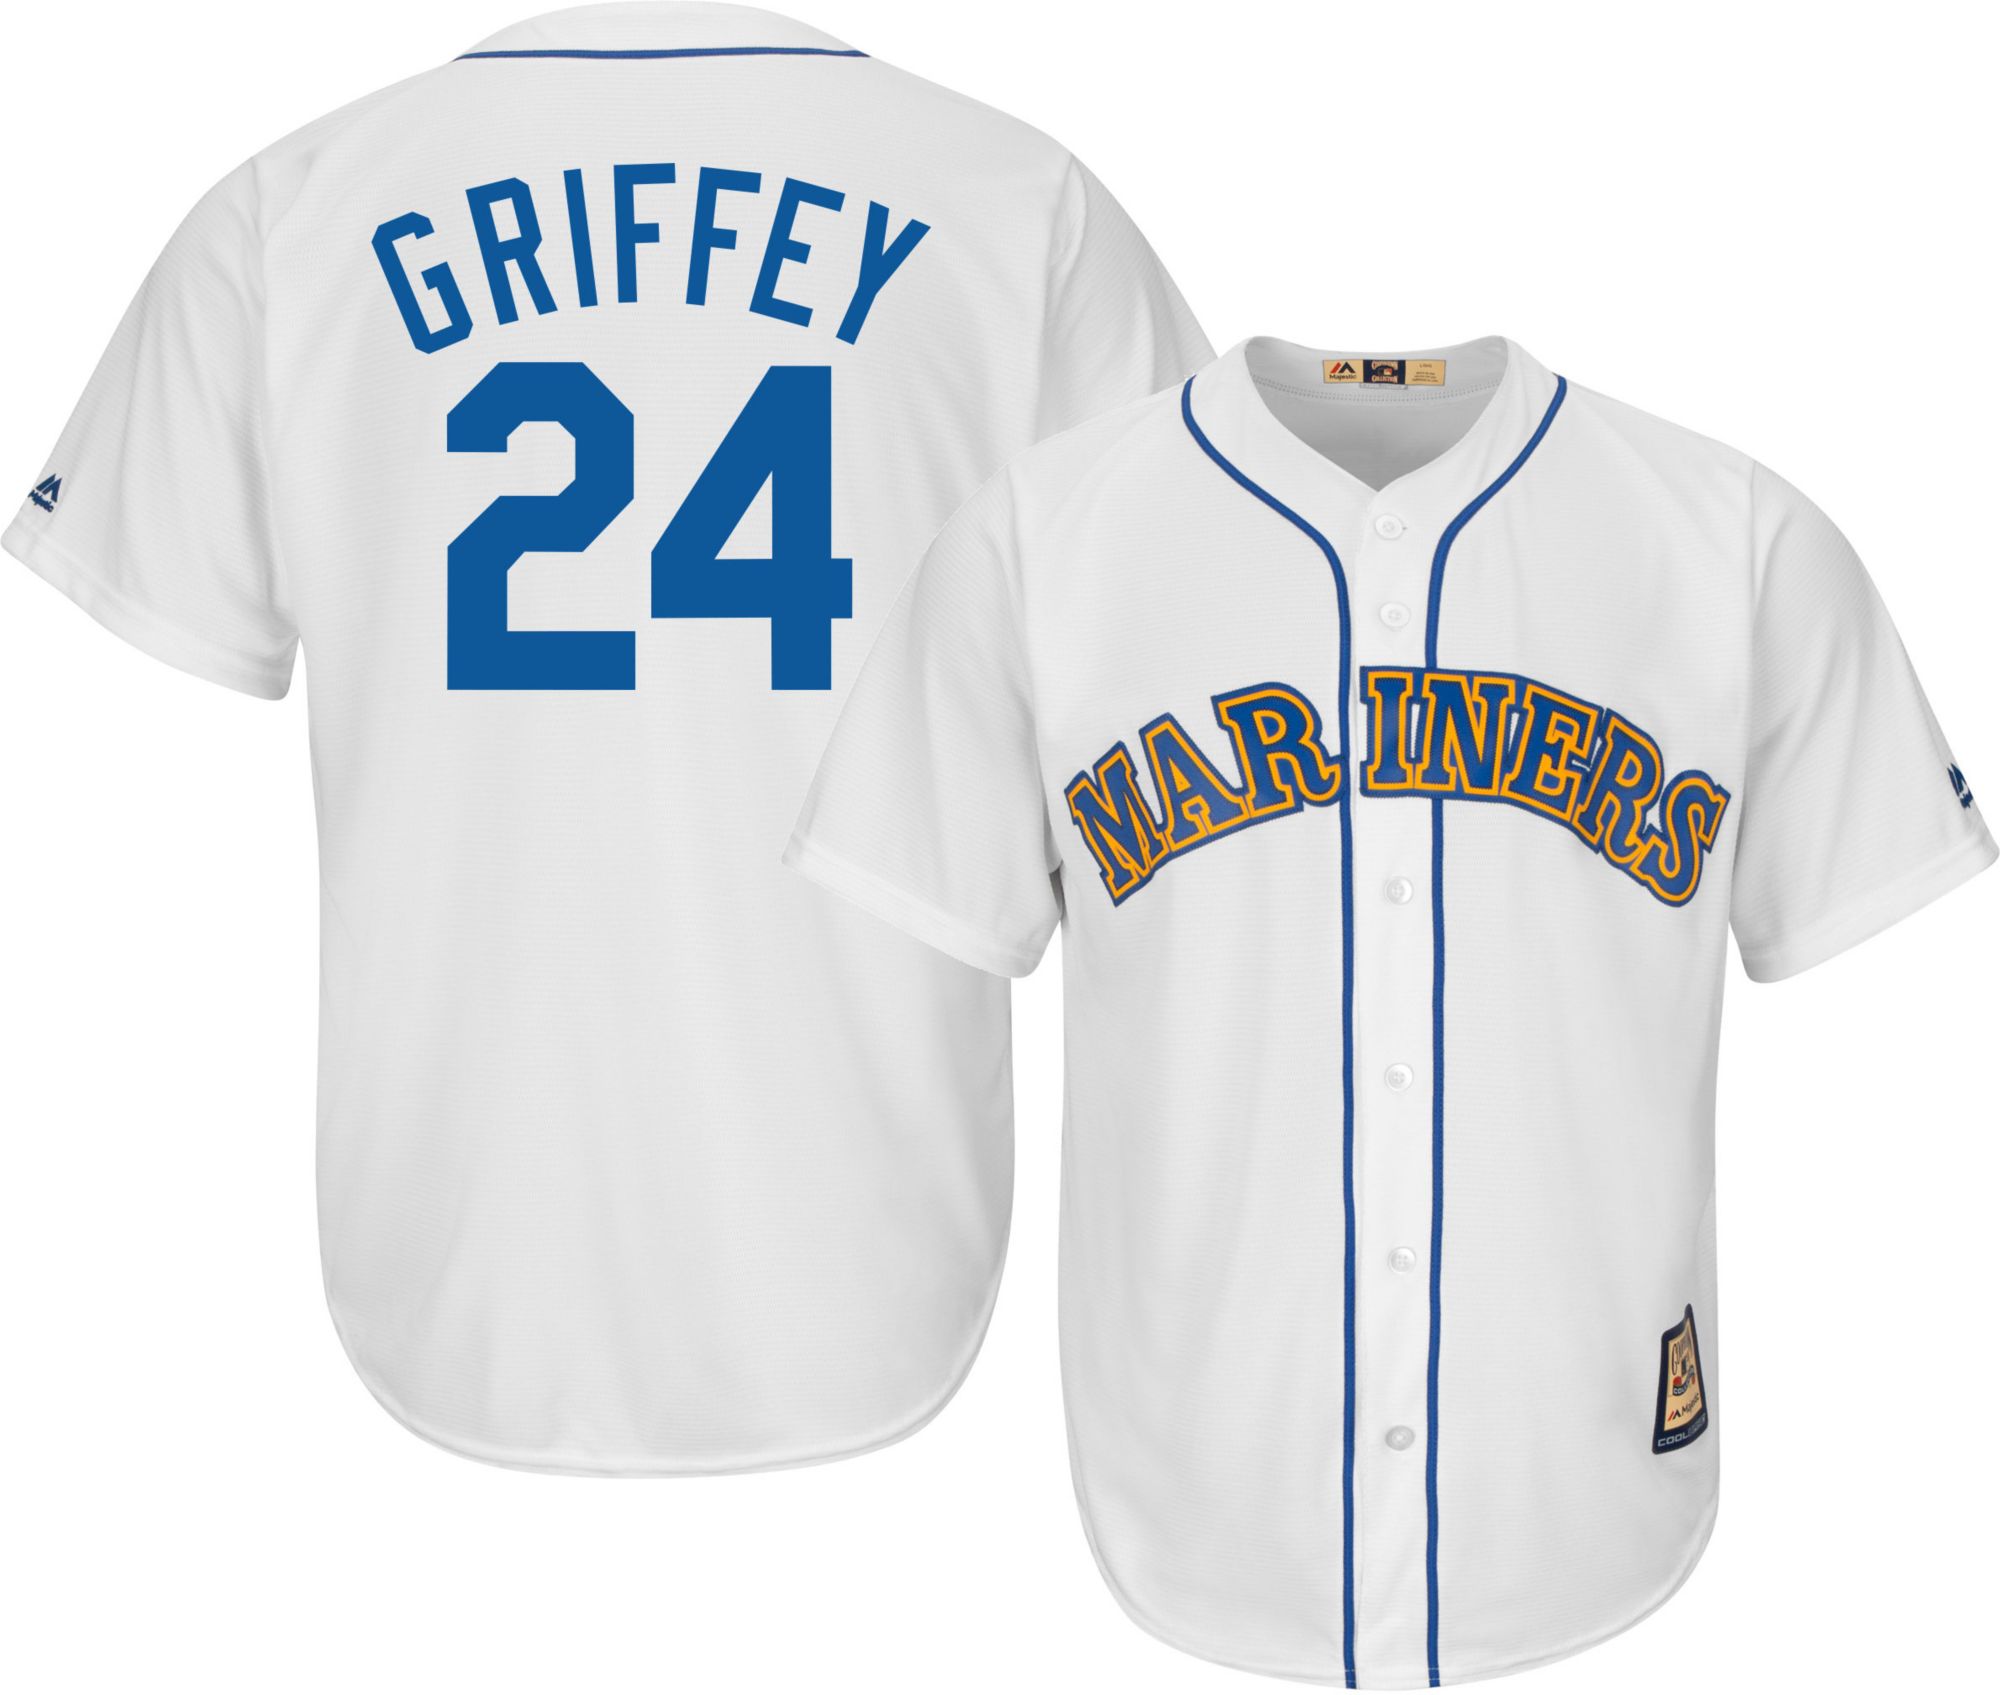 seattle mariners cooperstown jersey